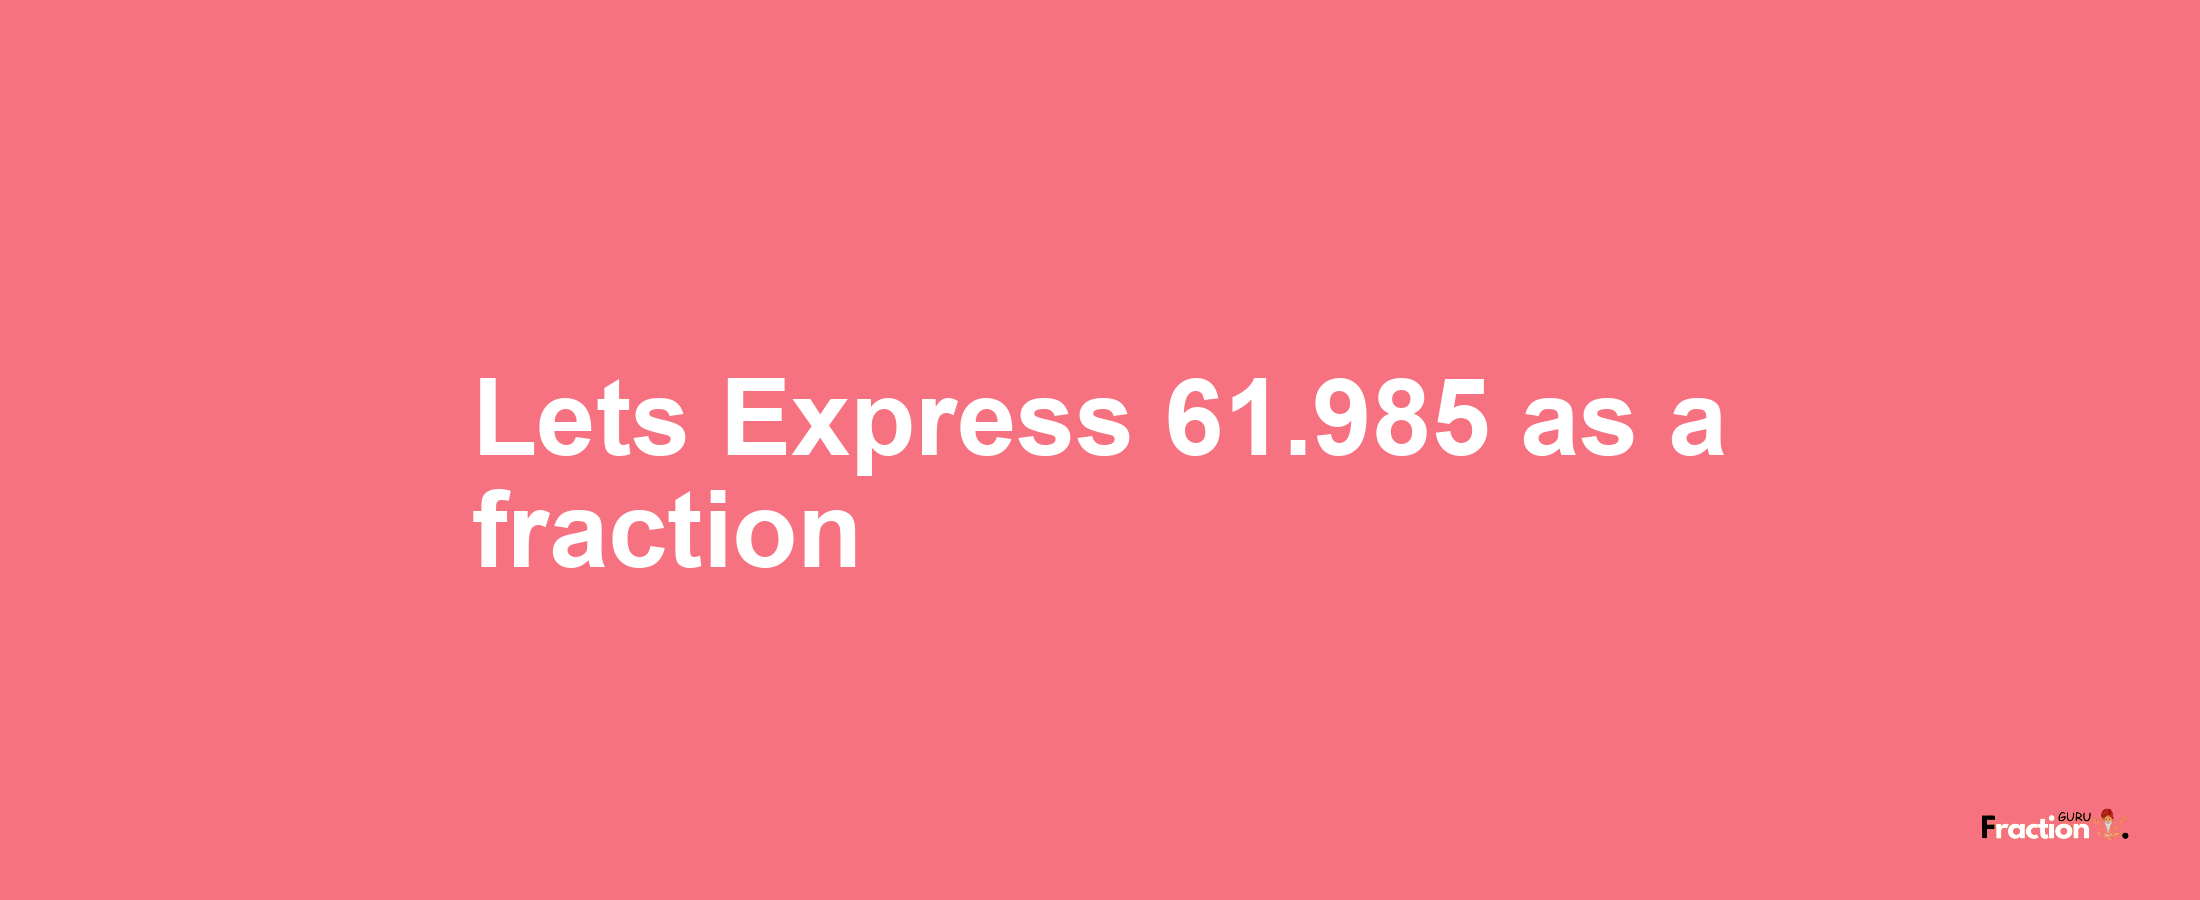 Lets Express 61.985 as afraction